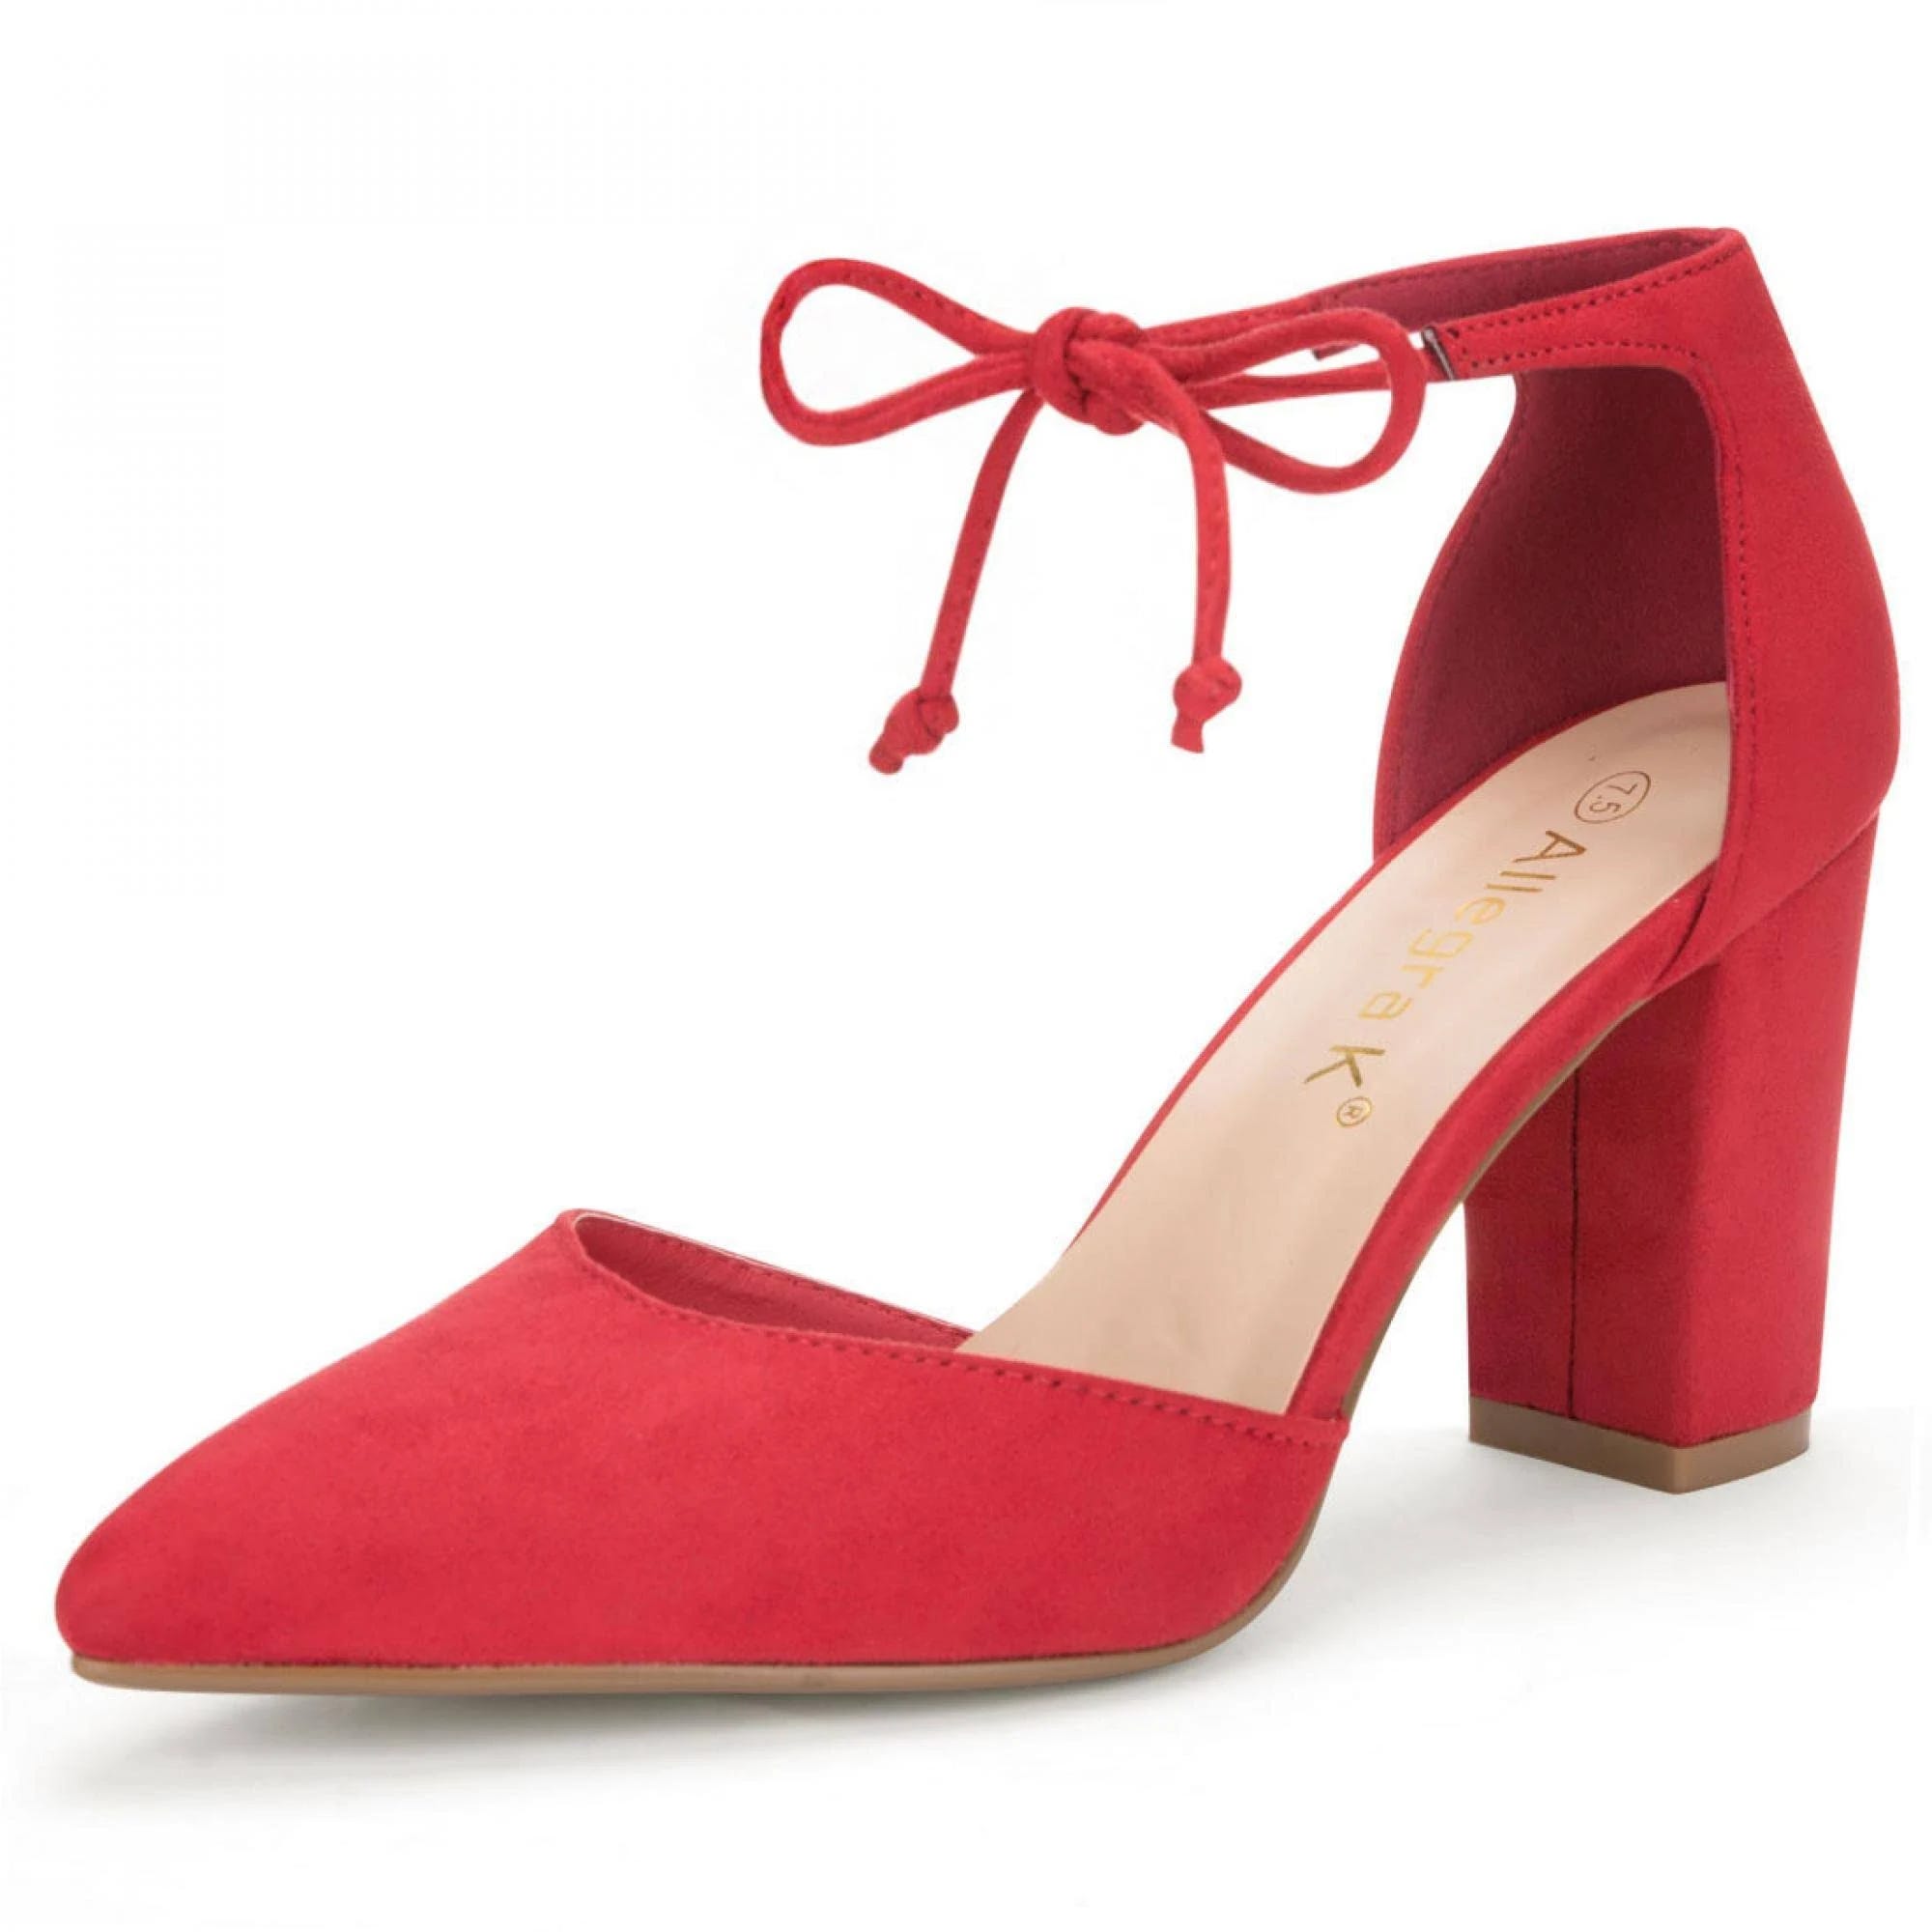 Stylish Allegra K's Pointed-Toe Red Ankle Strap Pumps | Image